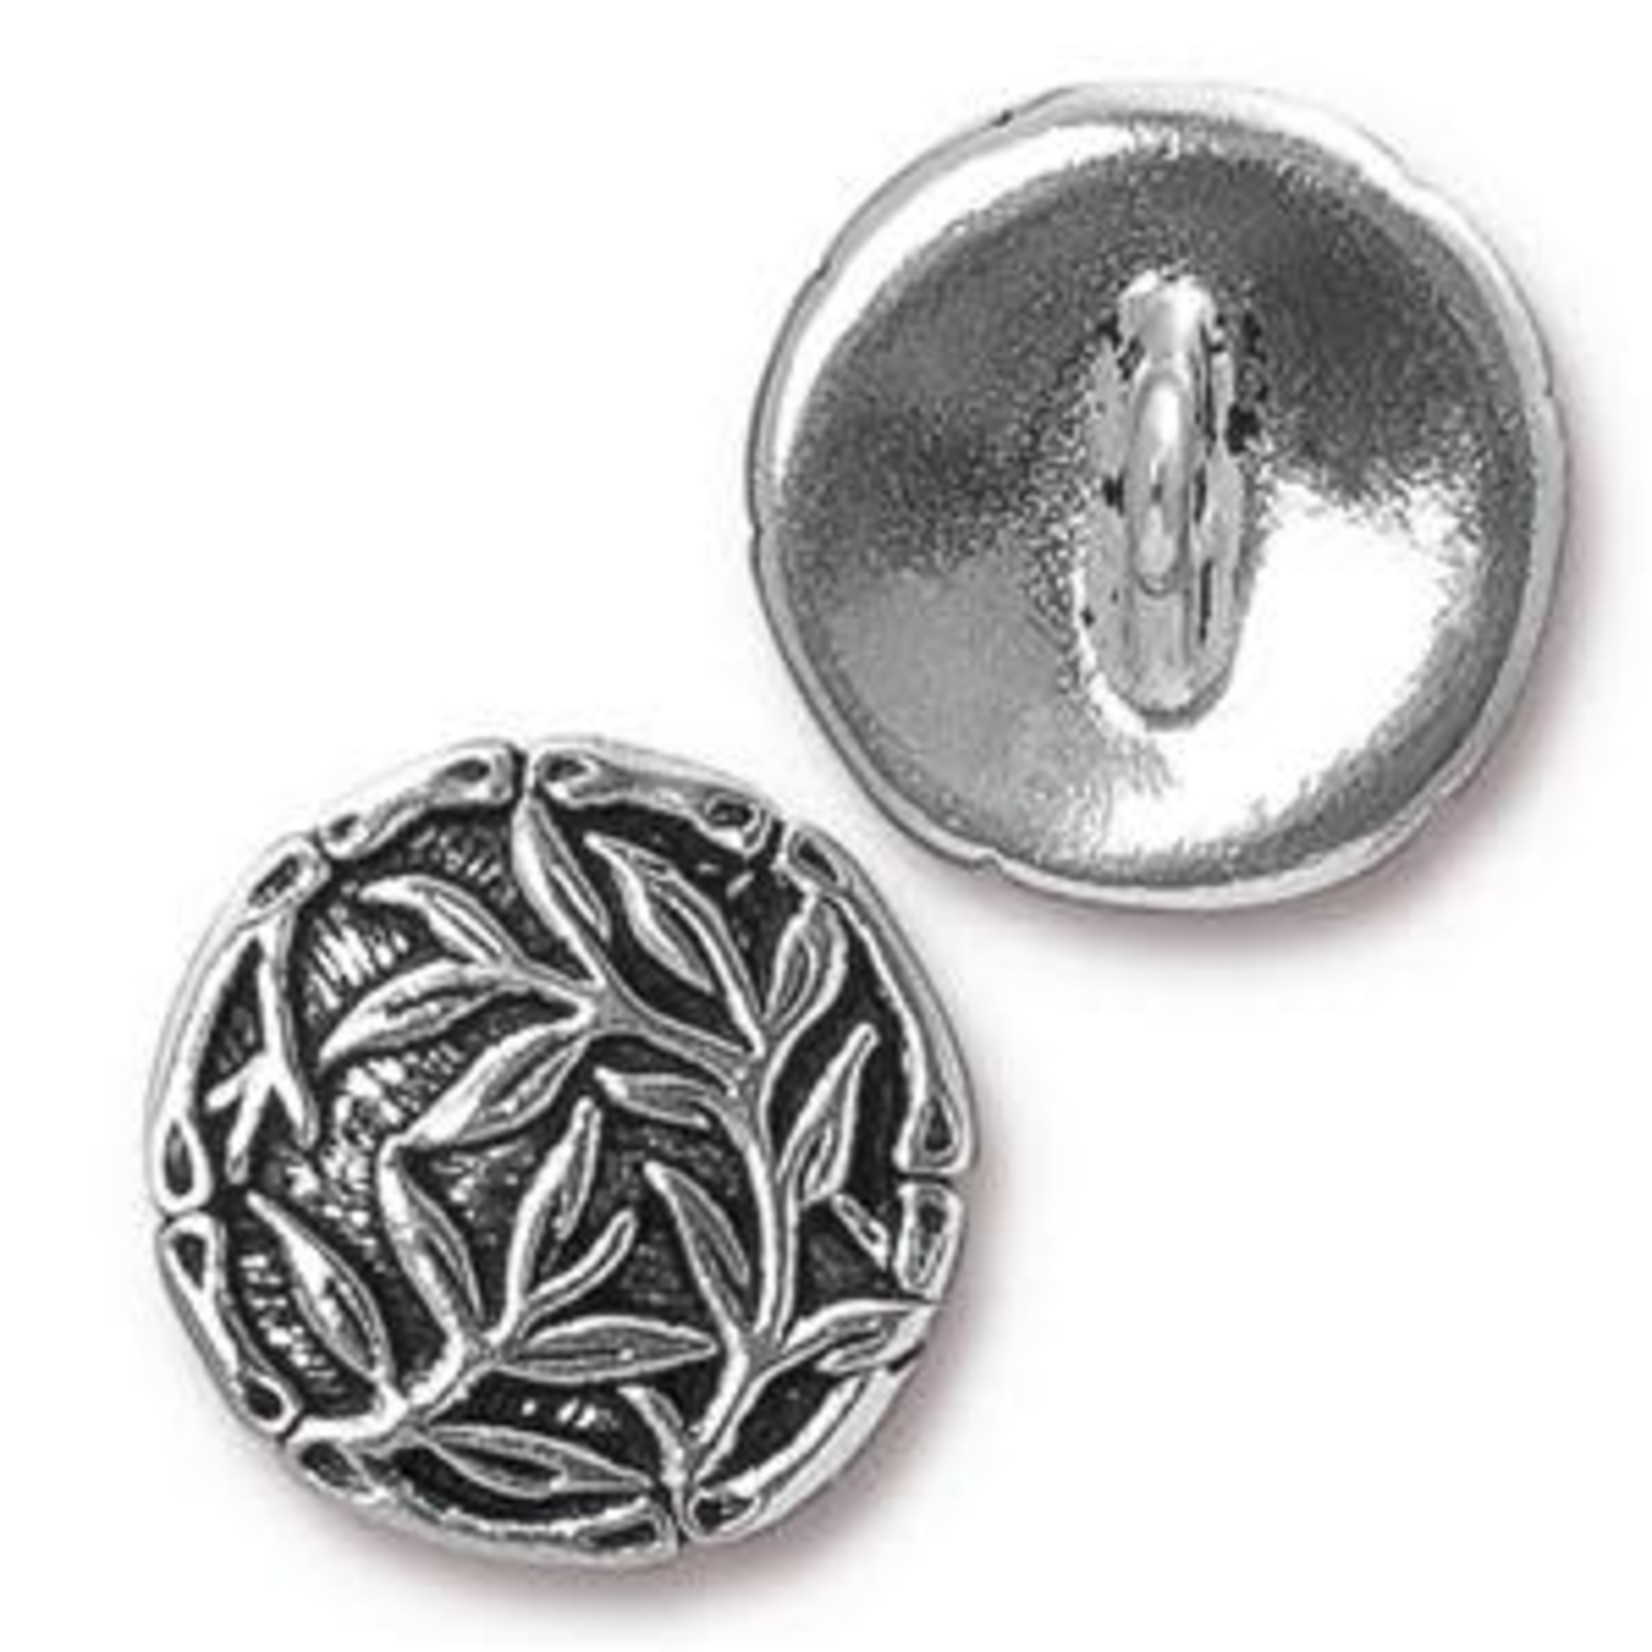 TierraCast Tierracast Antique Silver Plated Bamboo Button